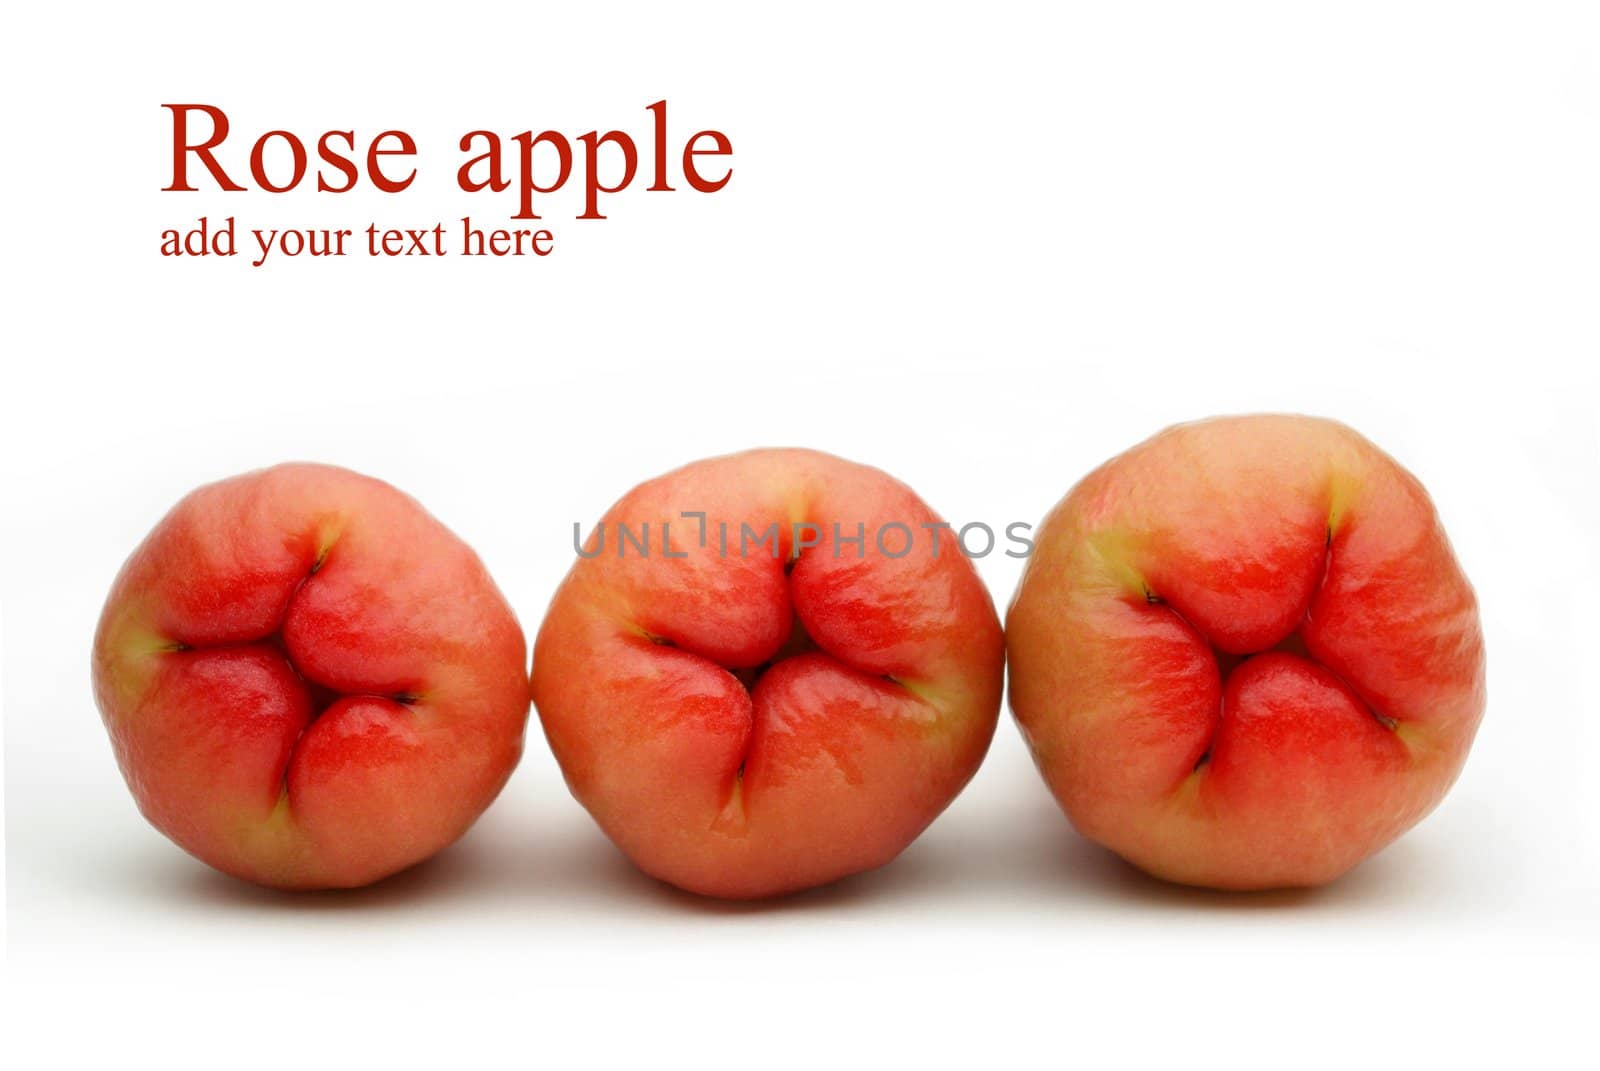 Rose apples isolated on white background by pixbox77